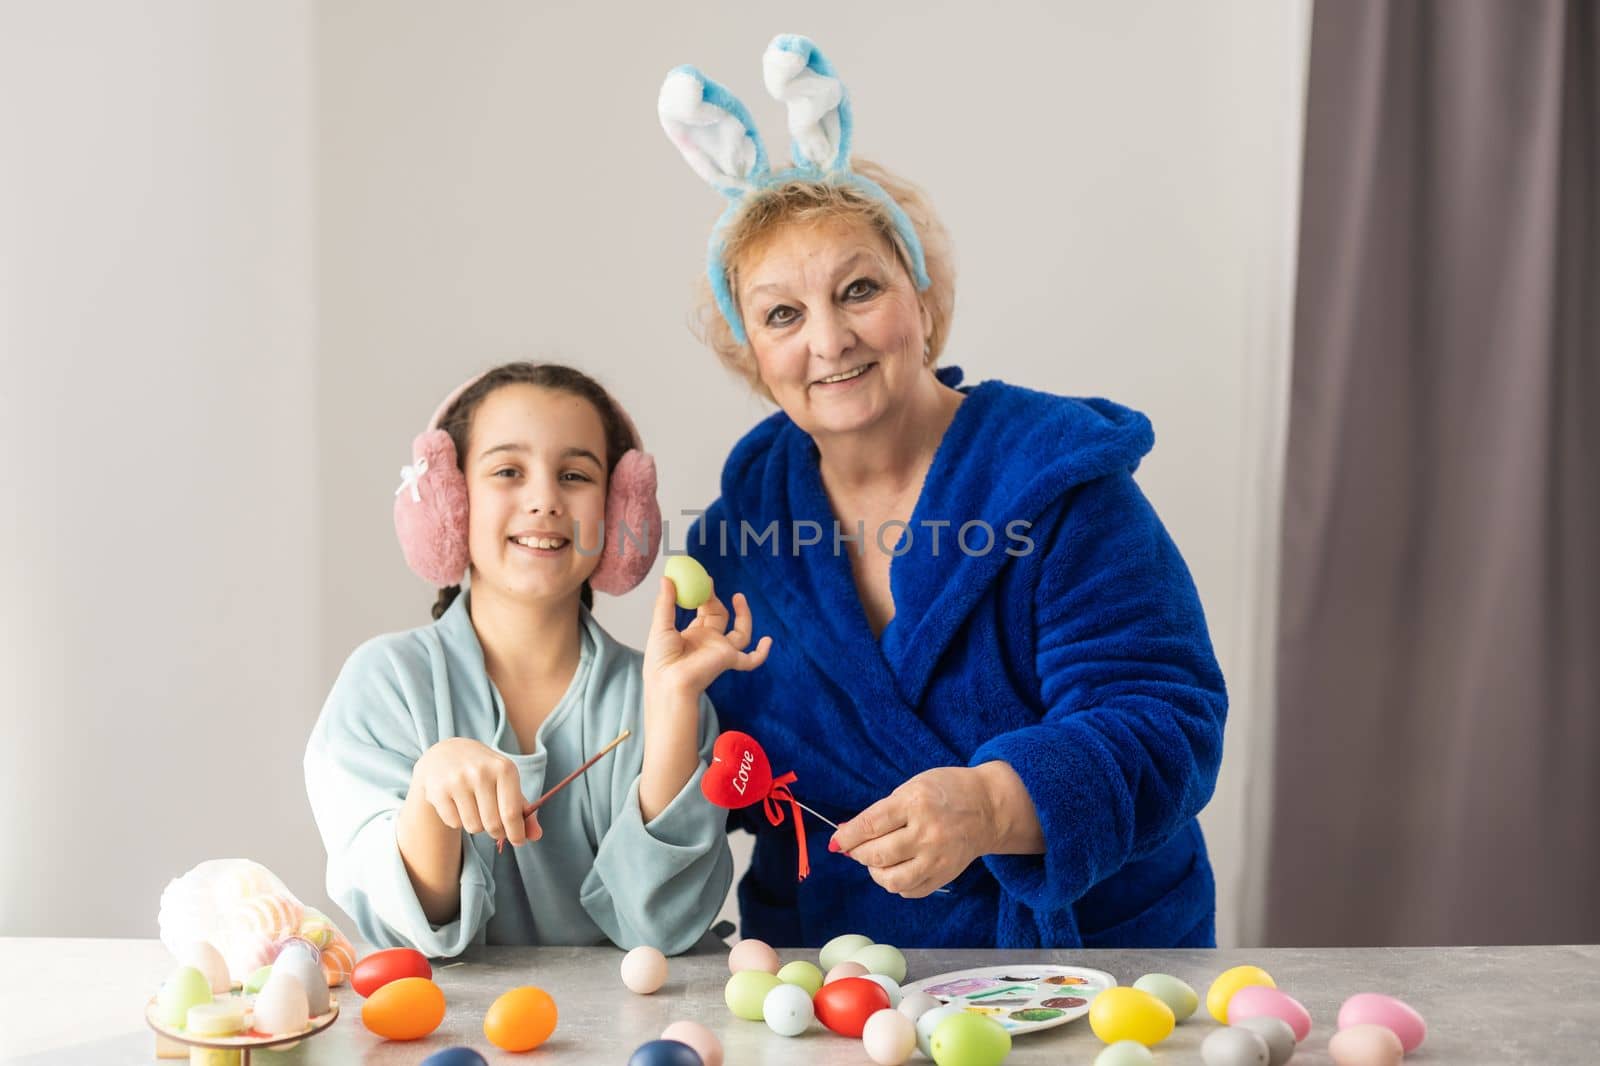 Little girl with grandmother dyeing Easter eggs by Andelov13